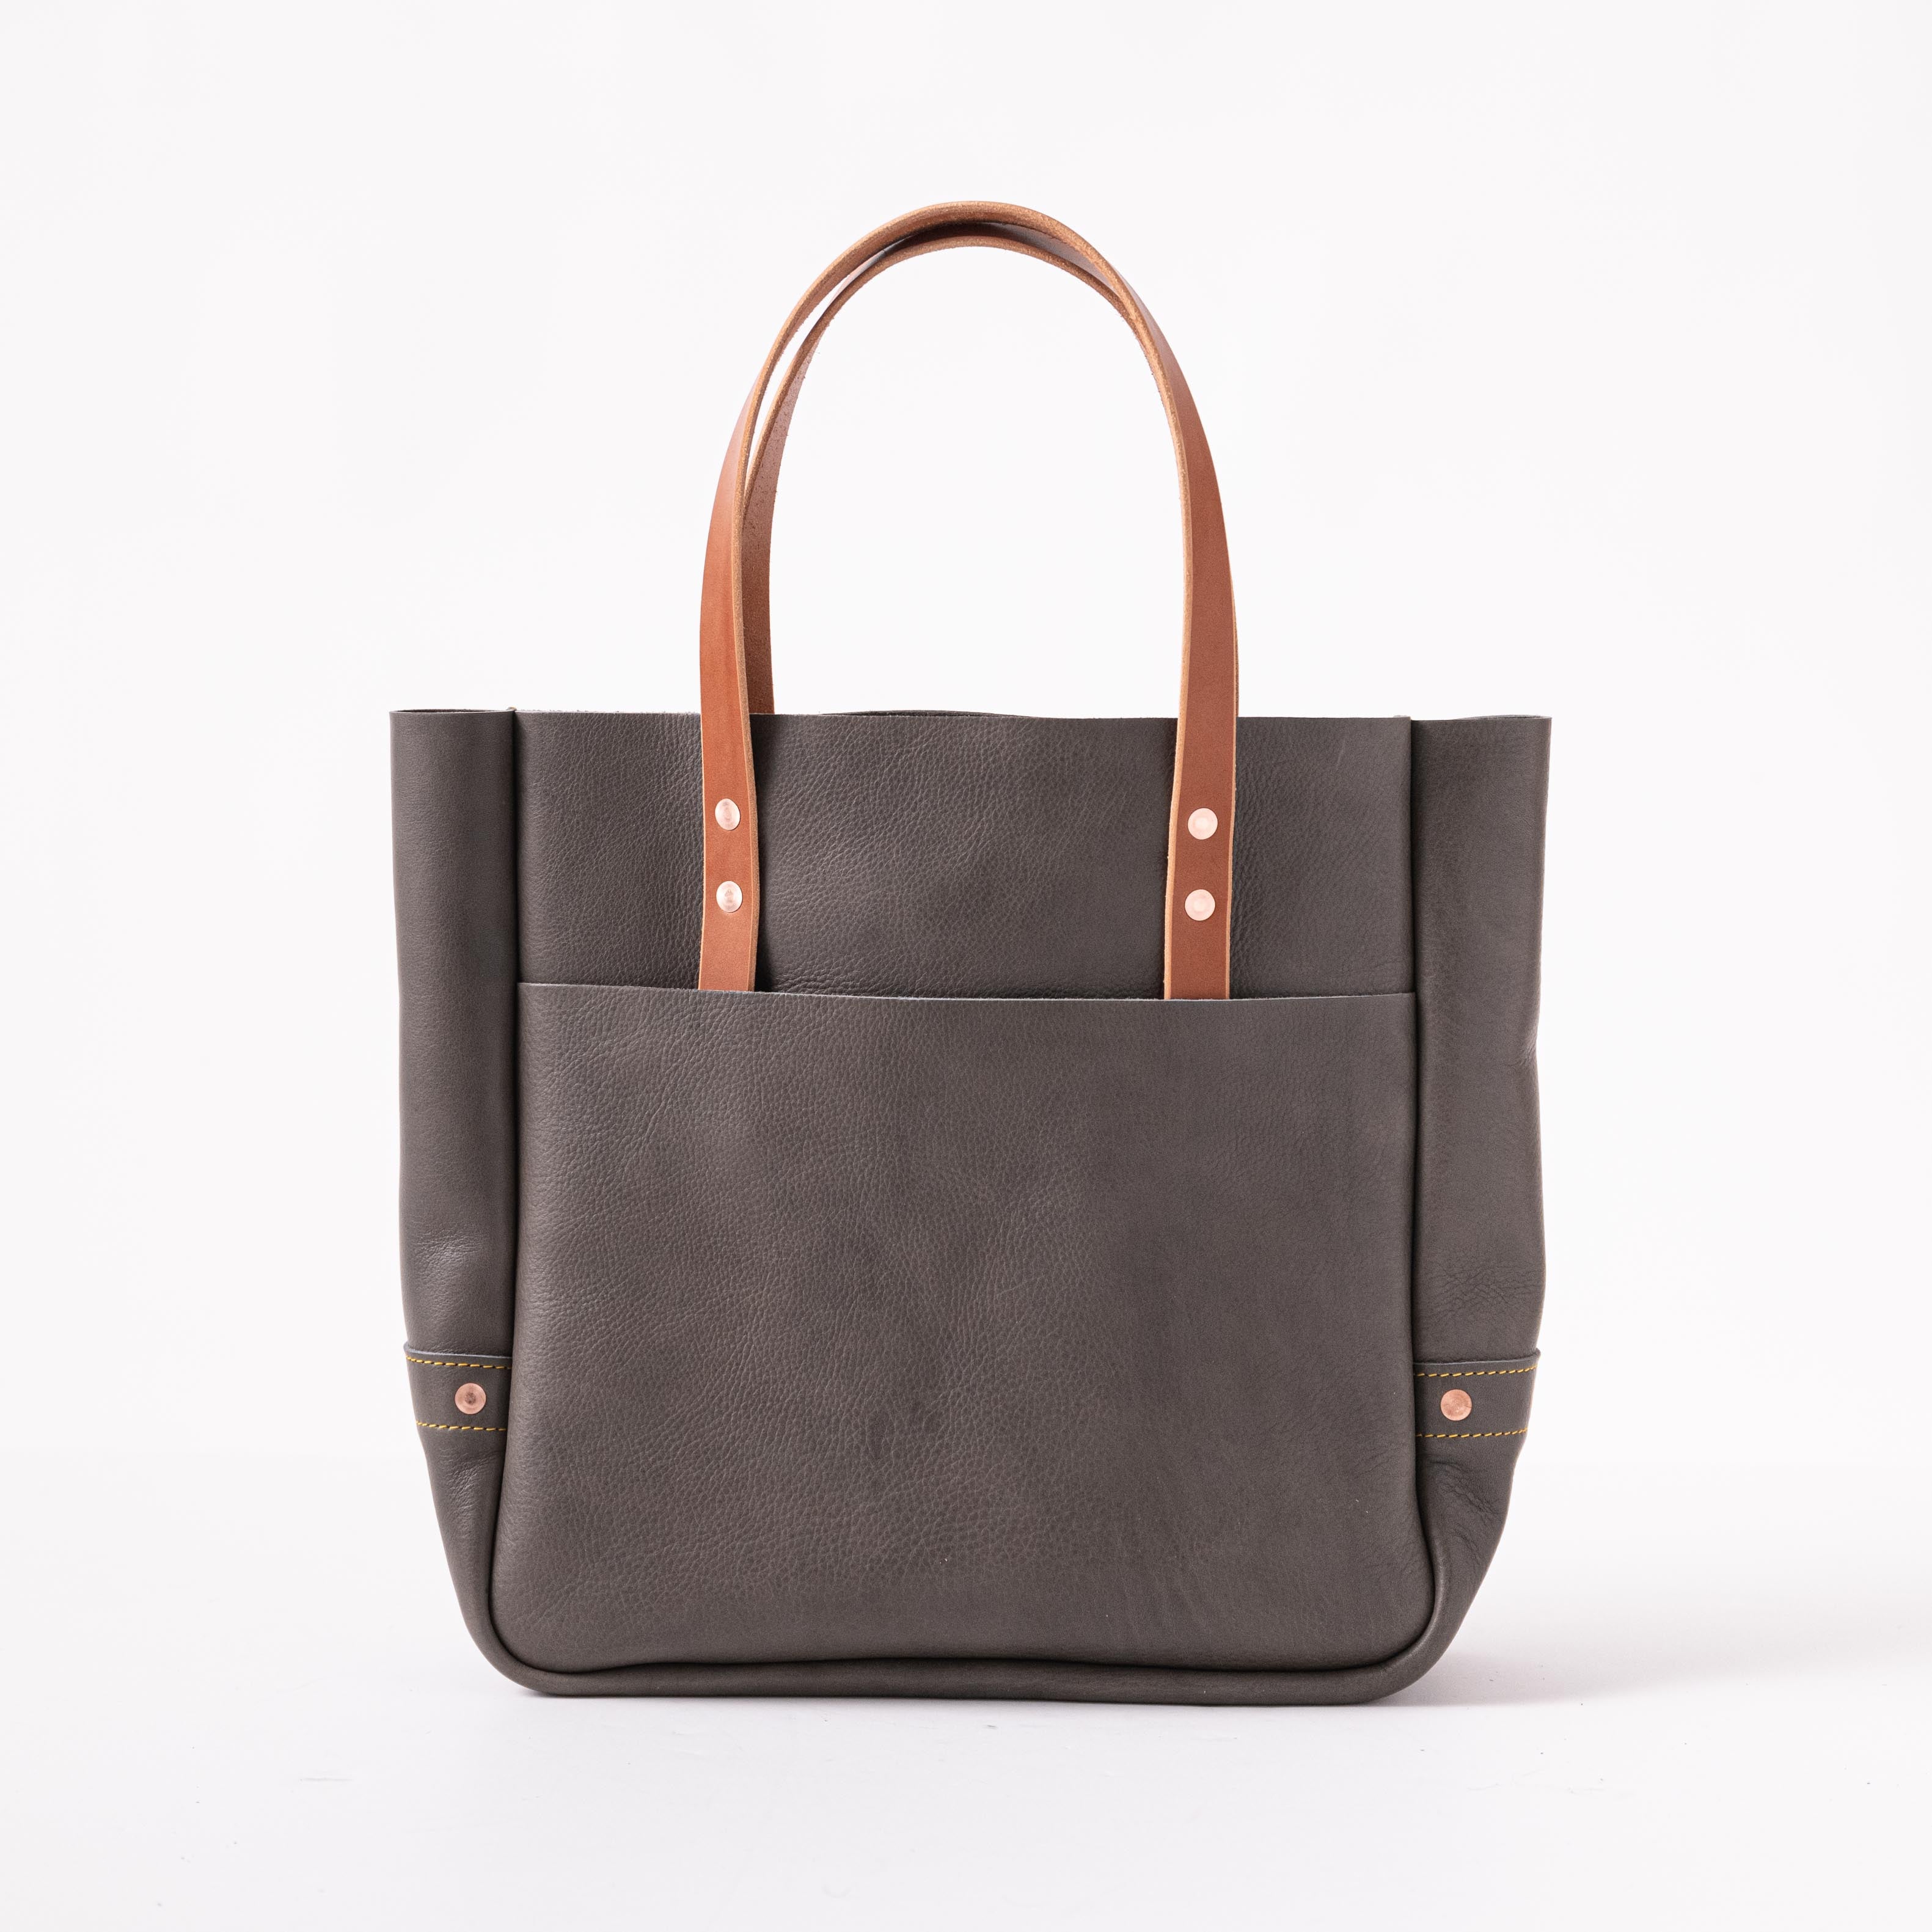 Grey Cypress Tote | Leather Tote bag made in the USA by KMM & Co.